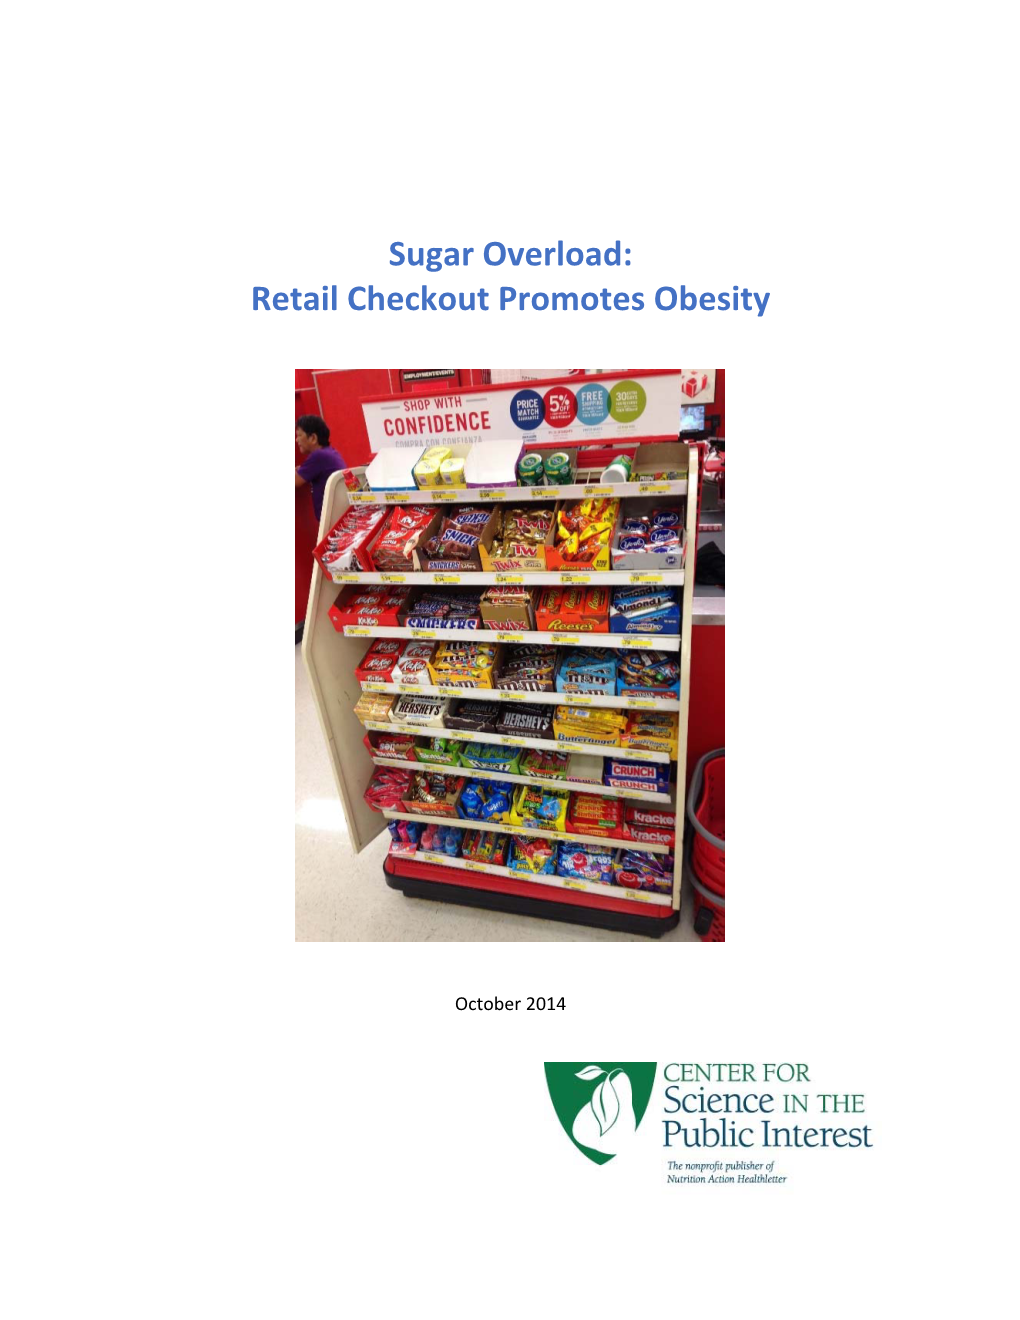 Sugar Overload: Retail Checkout Promotes Obesity